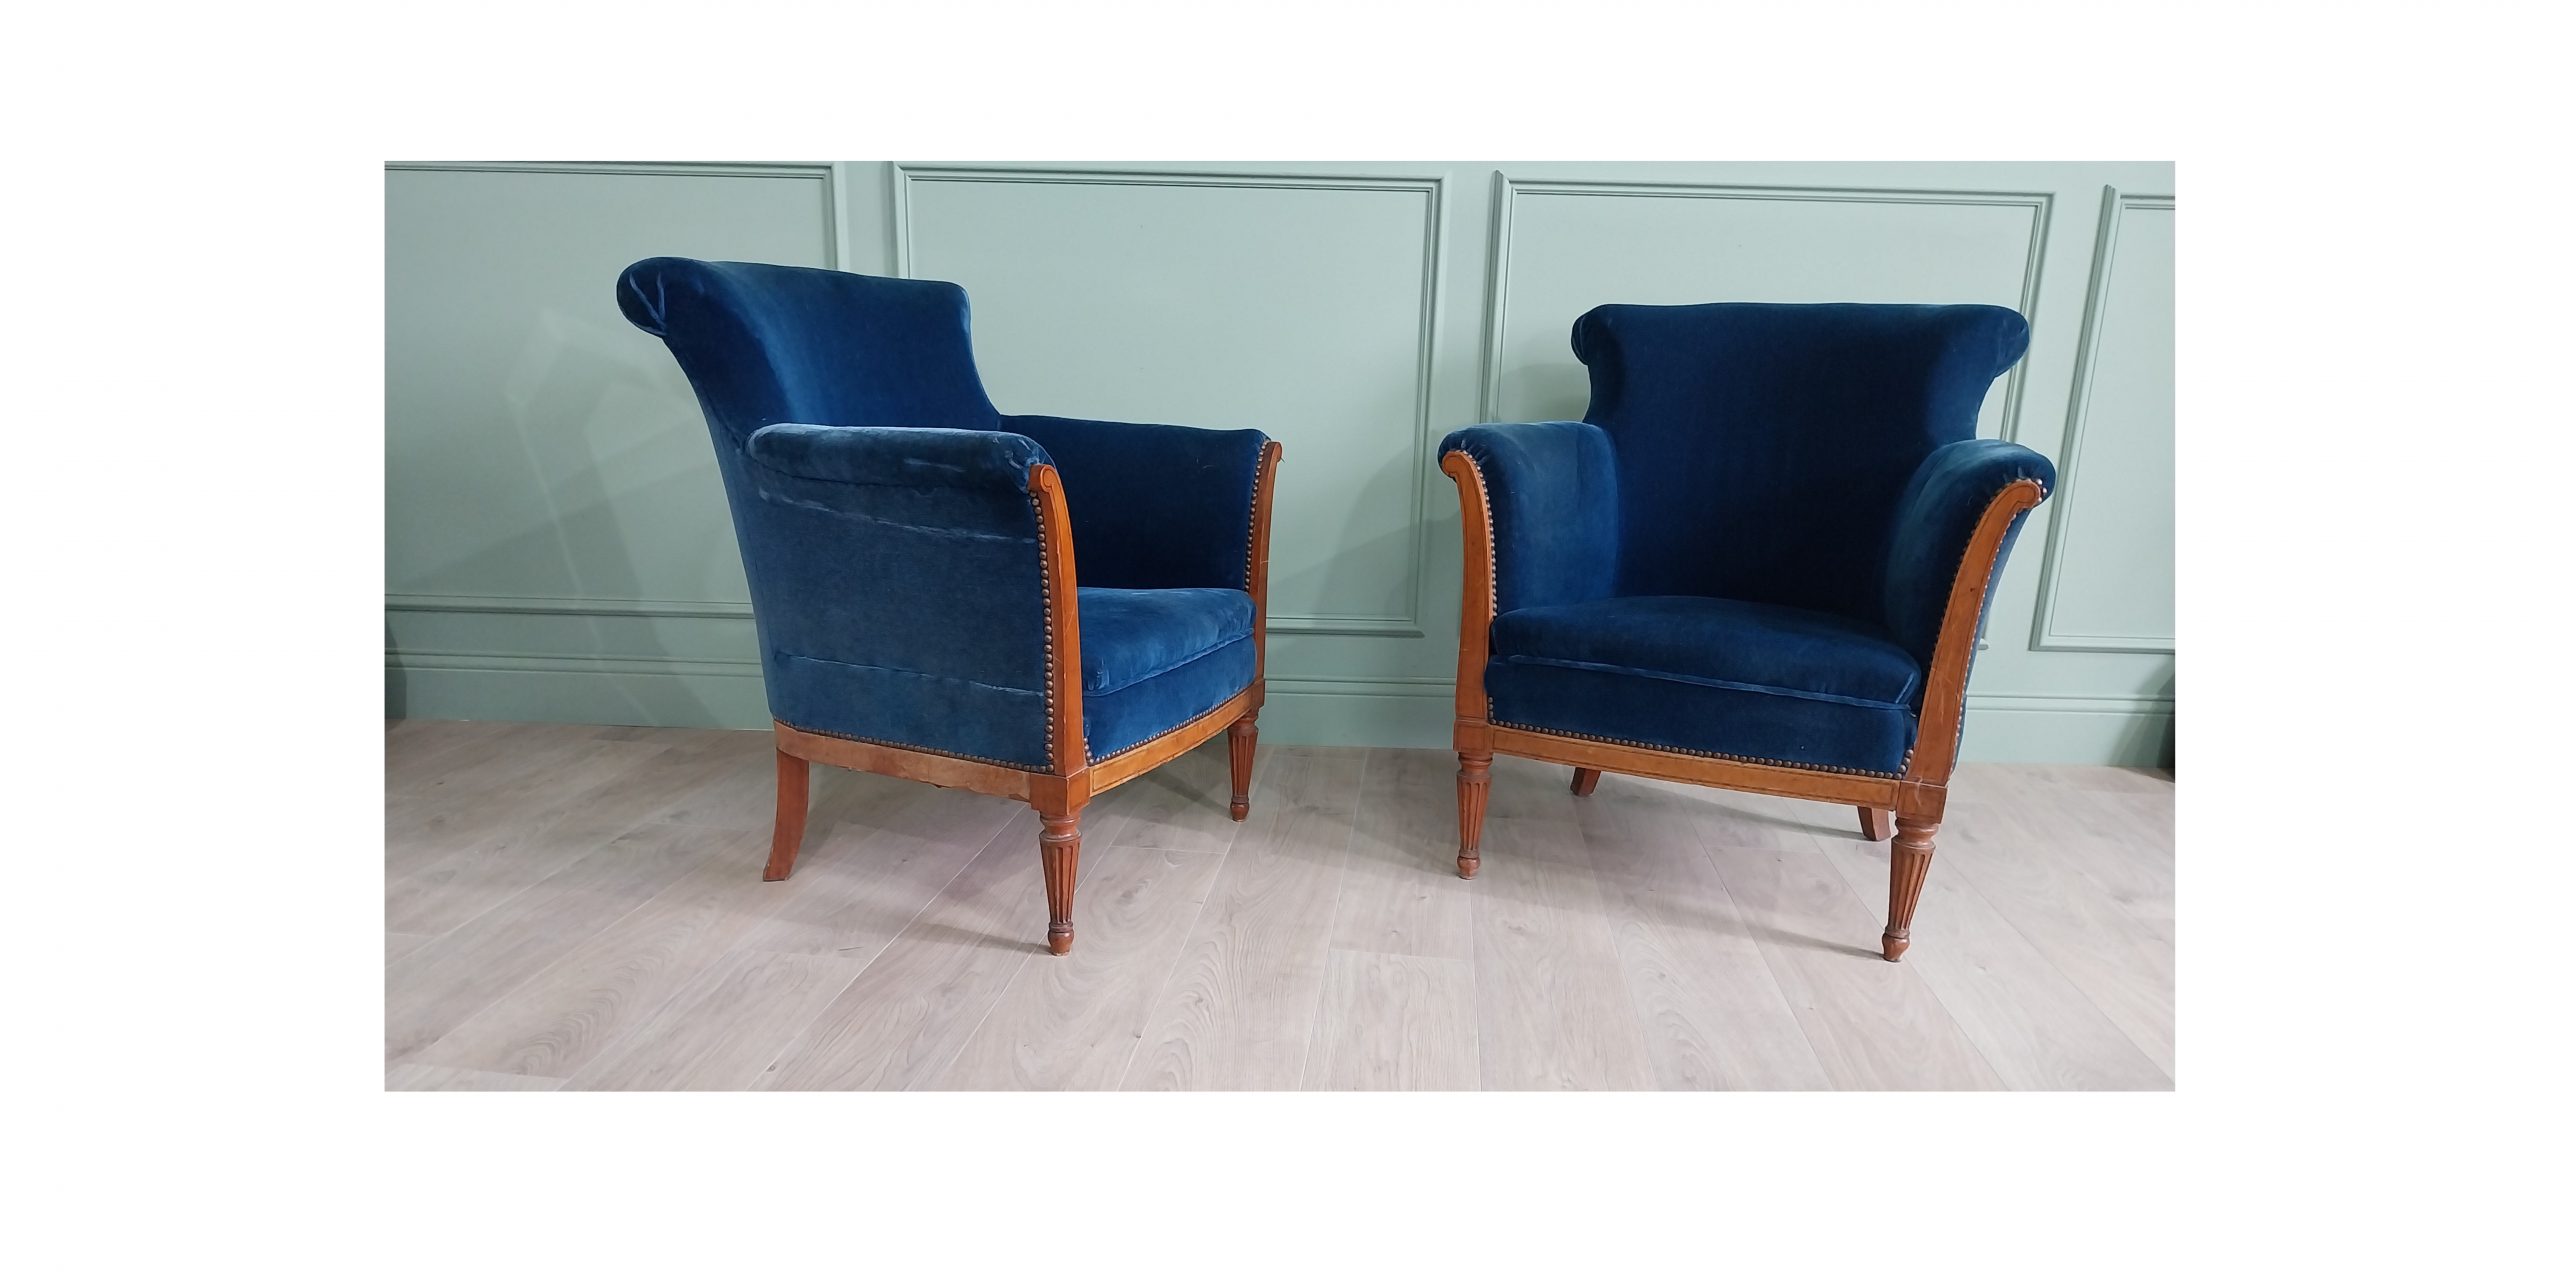 Pair of 19th C. French satinwood and velvet upholstered chairs